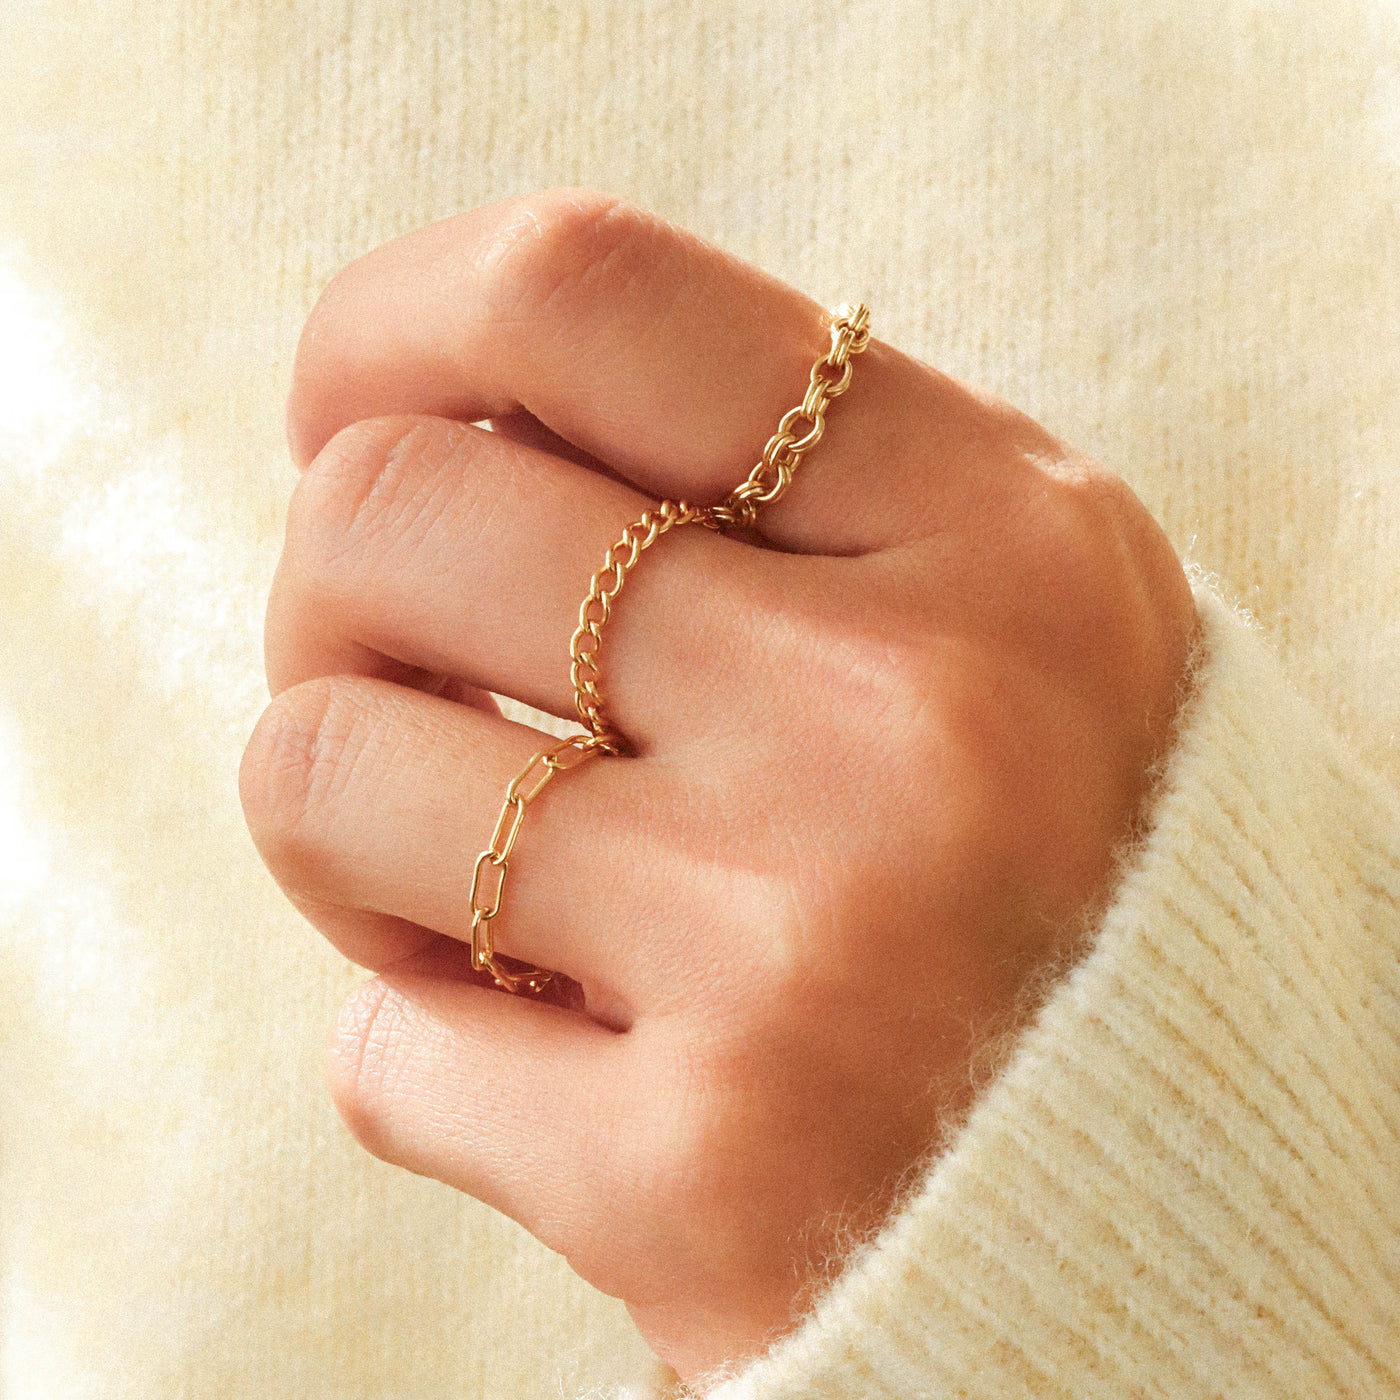 Gold filled stacking rings